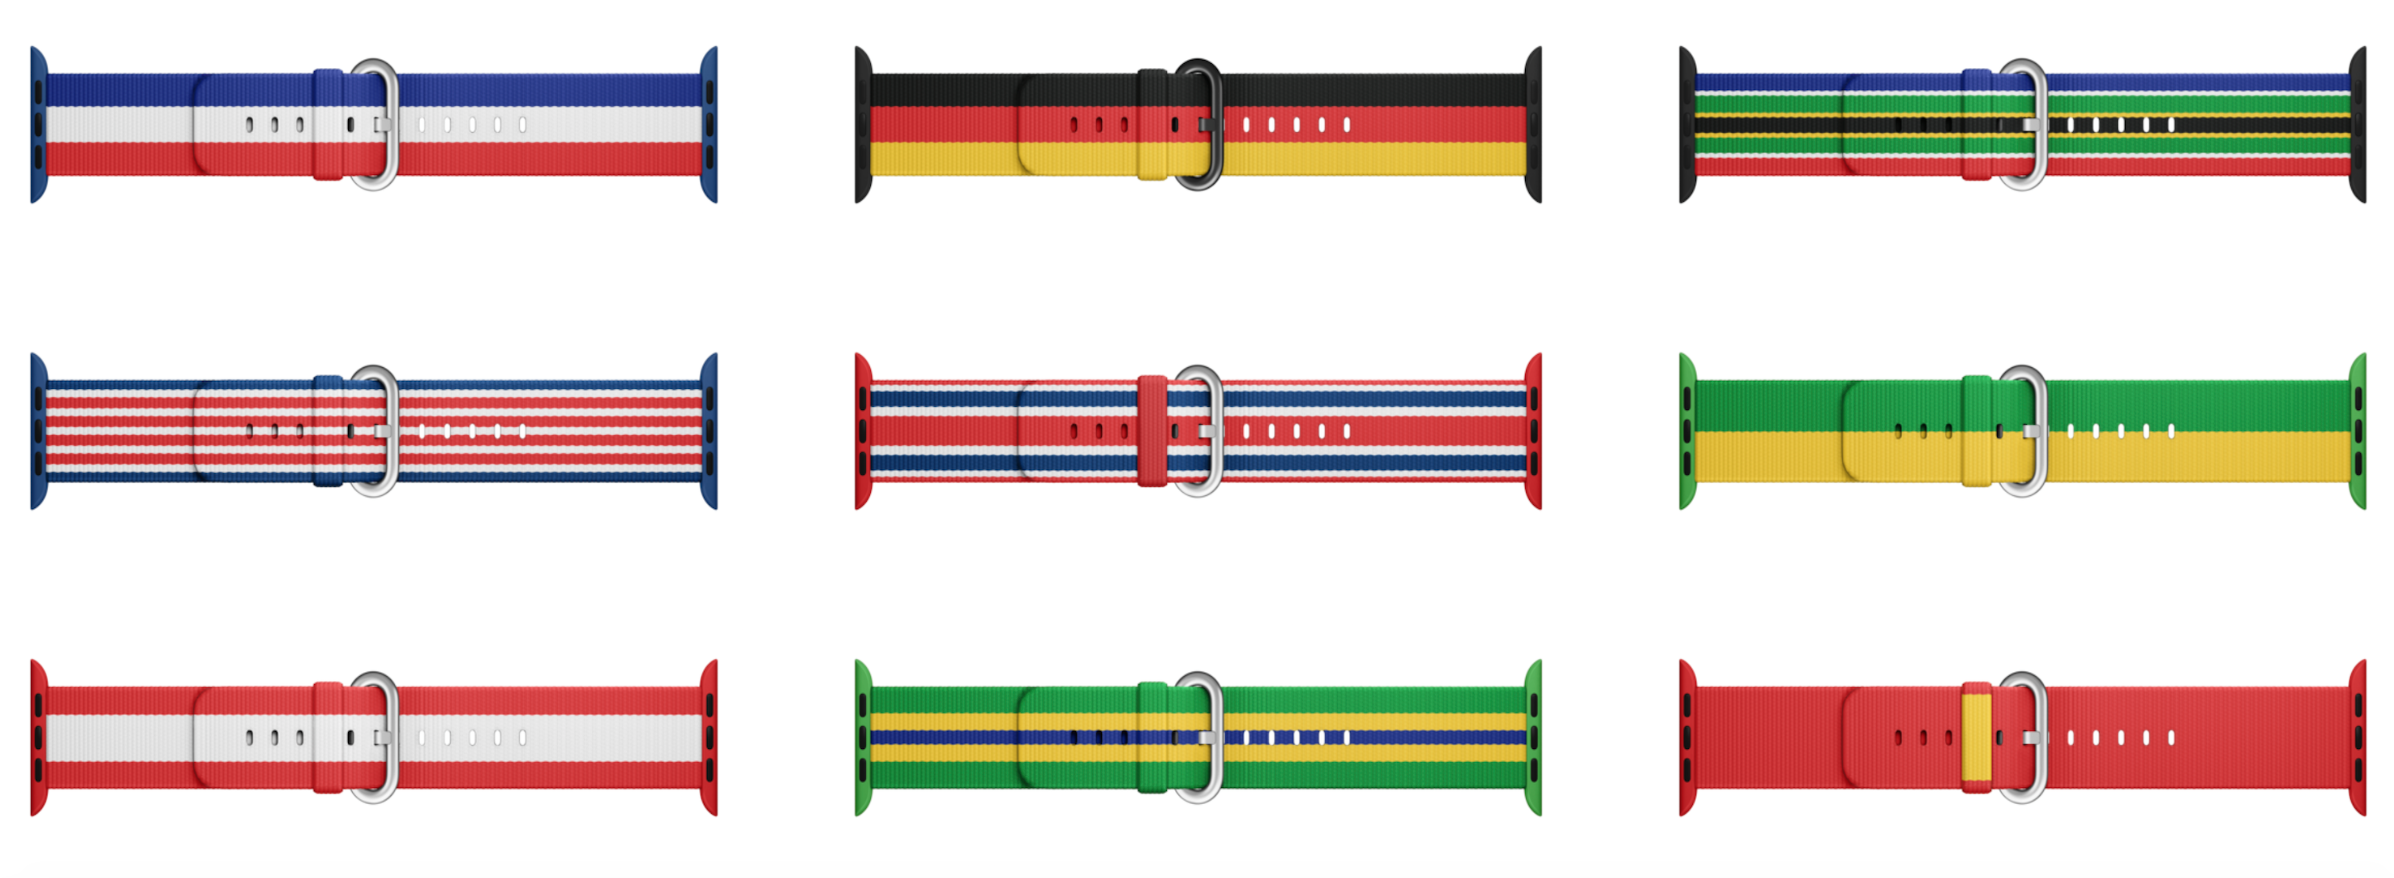 Flag-Themed Olympic Apple Watch Bands Gifted to Verified Olympic Athletes